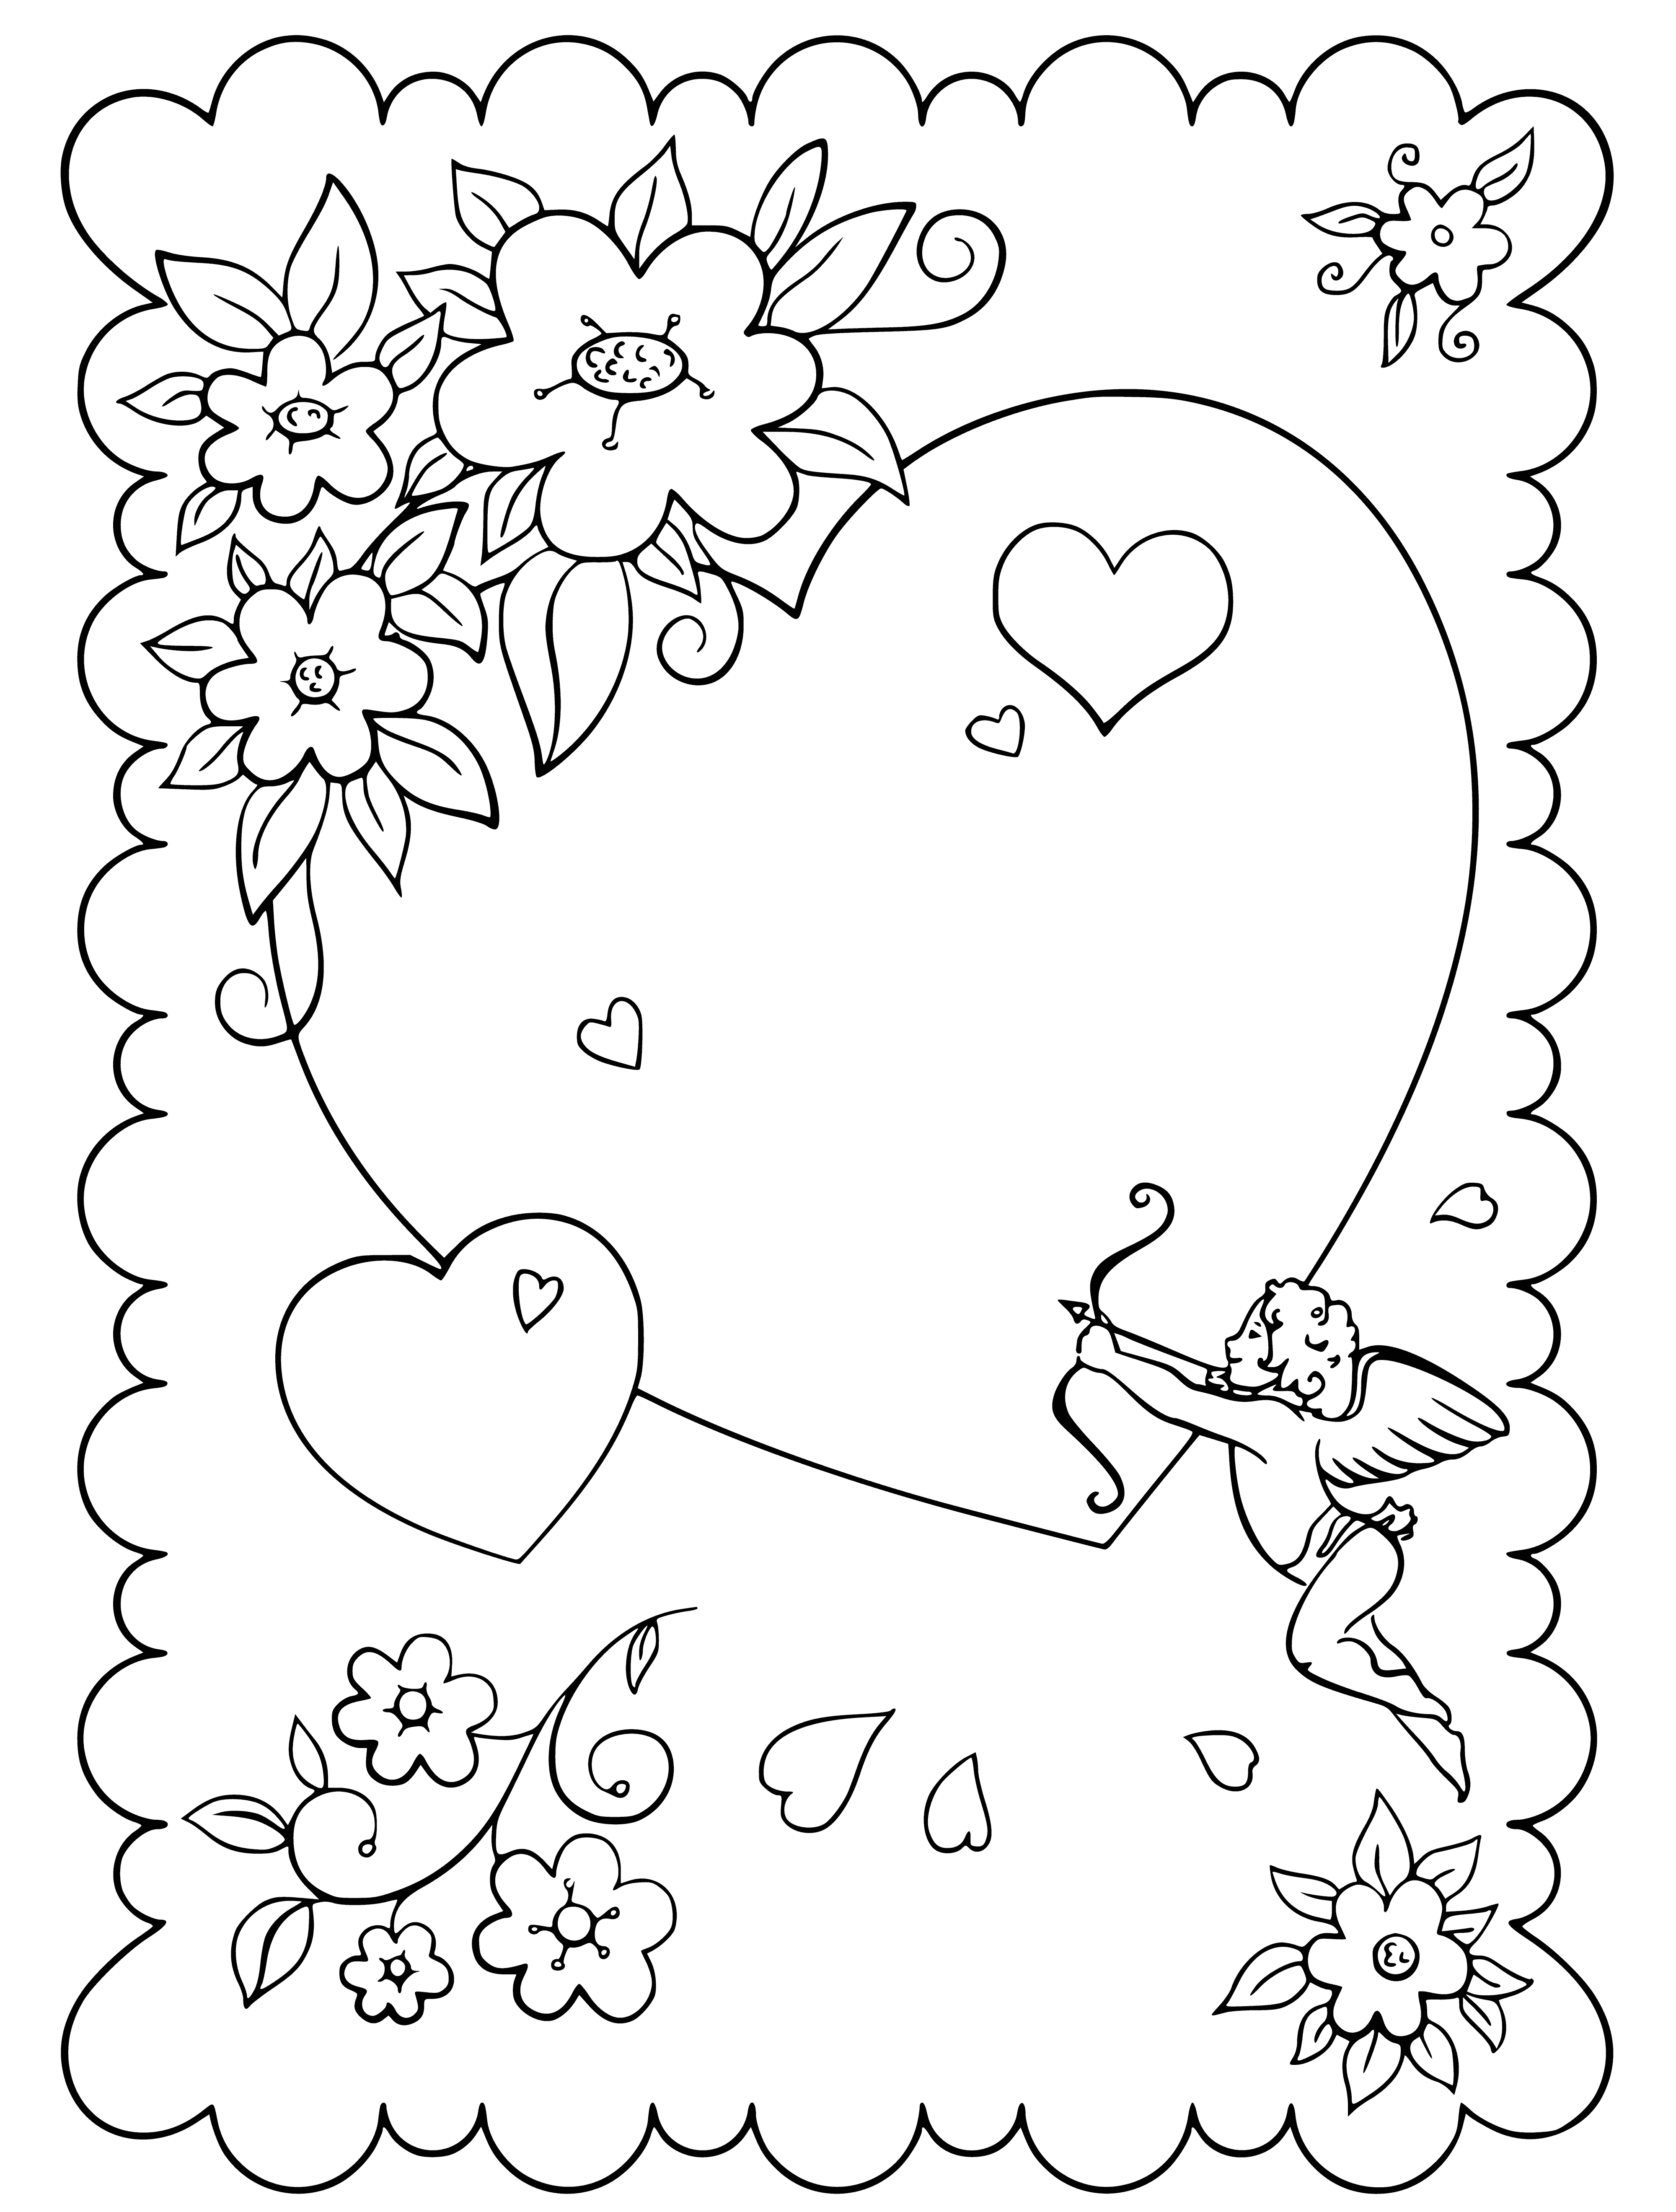 coloring page: Heart w/ gold crown & red roses. Text reads: "Happy Valentine's Day". Perfect card to show your love this V-Day! #ValentinesDay #Love